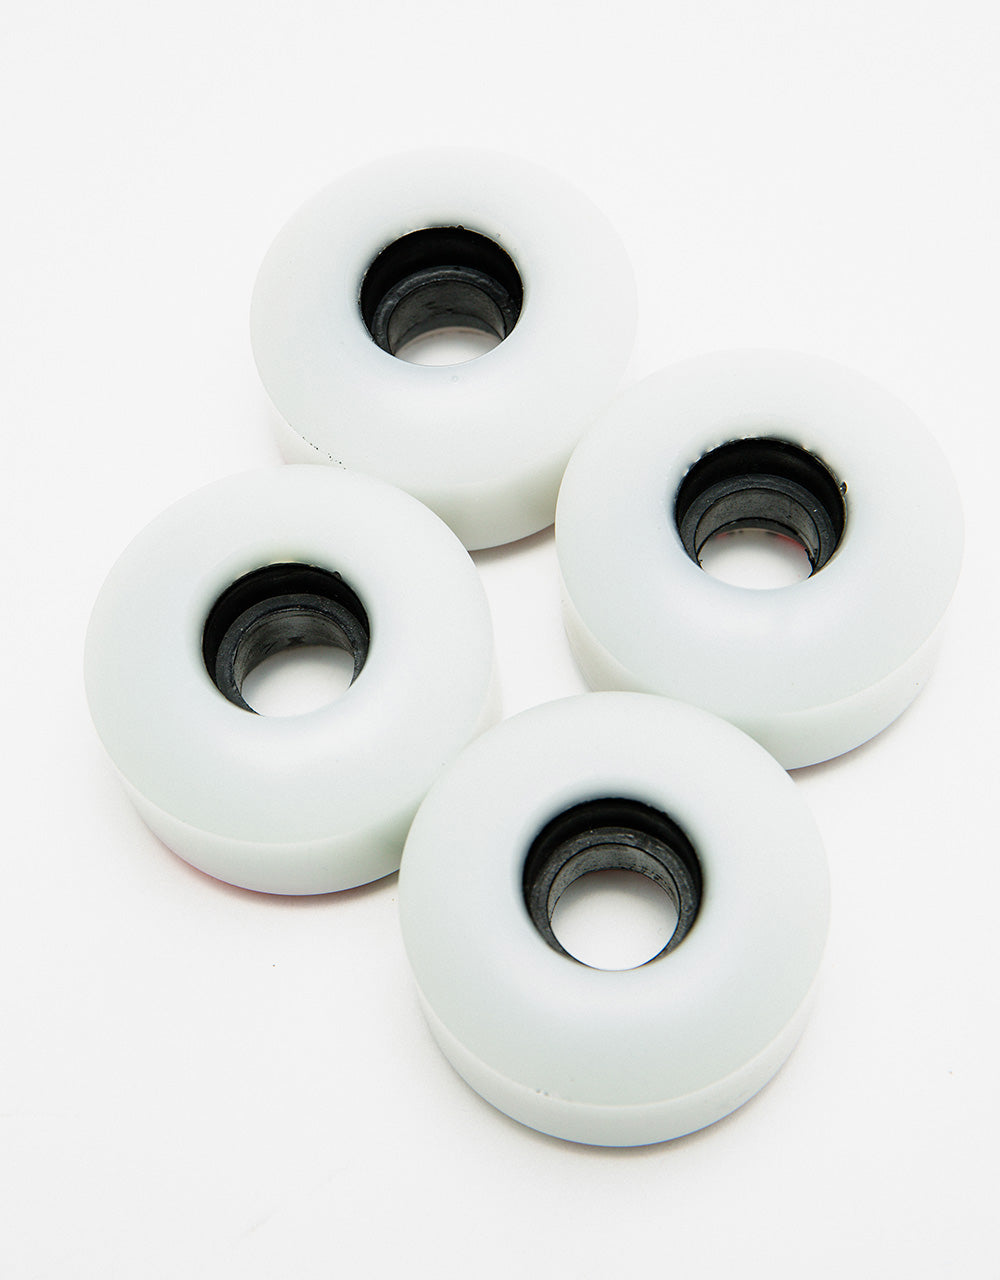 Spitfire Chargers Classic 80HD Skateboard Wheels